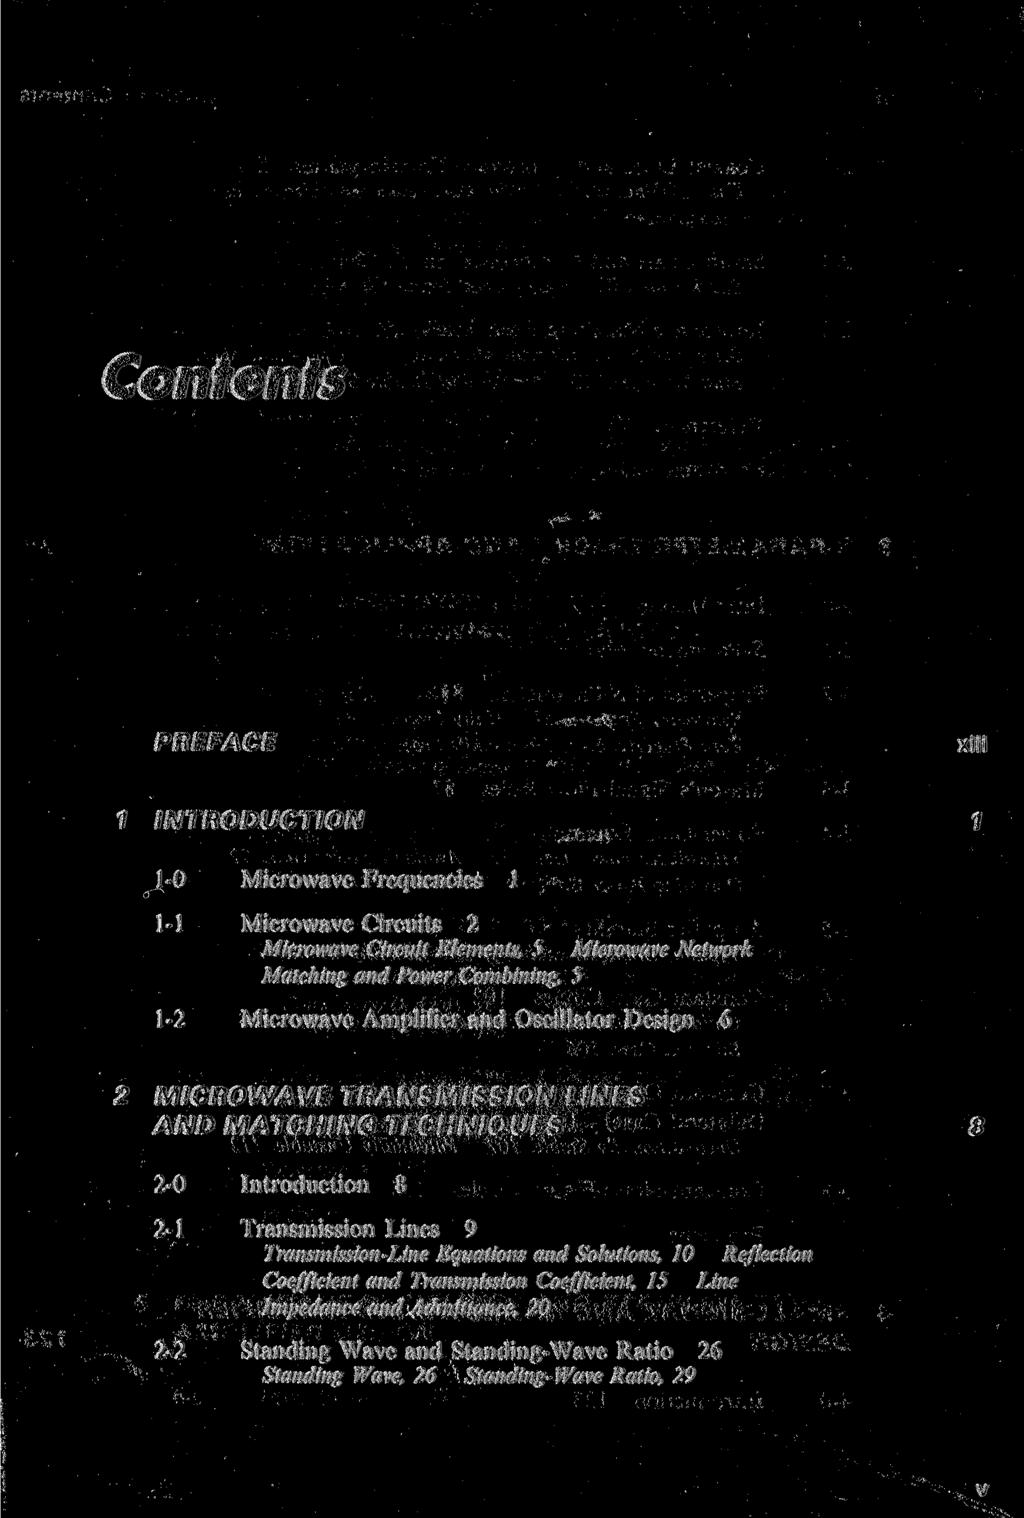 Contents PREFACE 1 INTRODUCTION 1-0 Microwave Frequencies 1 1-1 Microwave Circuits 2 Microwave Circuit Elements, 5 Microwave Network Matching and Power Combining, 5 1-2 Microwave Amplifier and